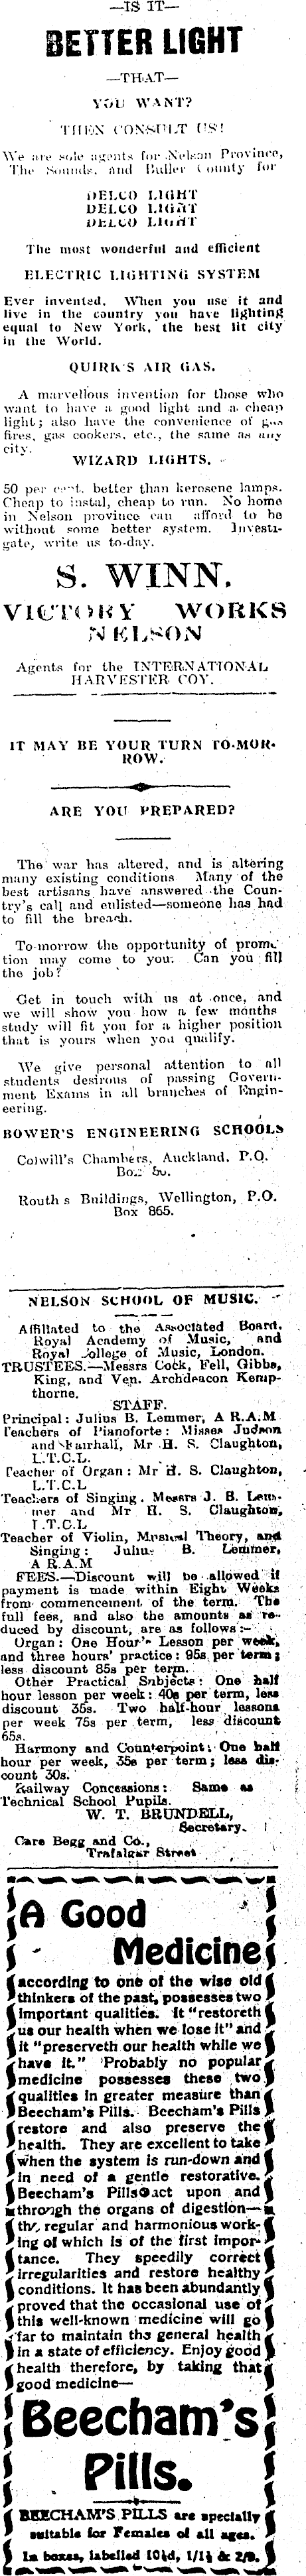 Papers Past Newspapers Nelson Evening Mail 3 June 1918 Page 8 Advertisements Column 7